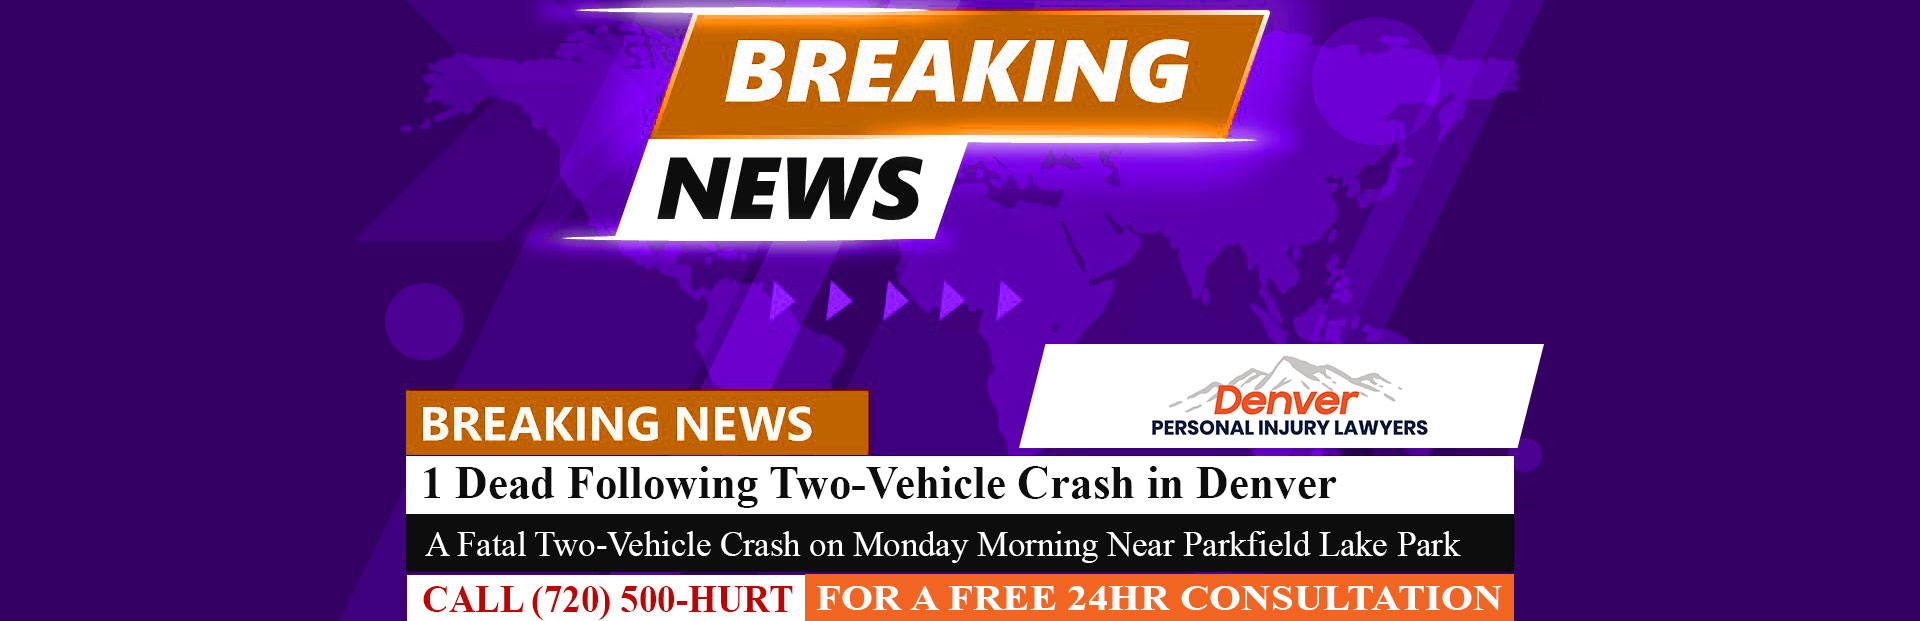 [01-02-24] 1 Dead Following Two-Vehicle Crash in Northeast Denver